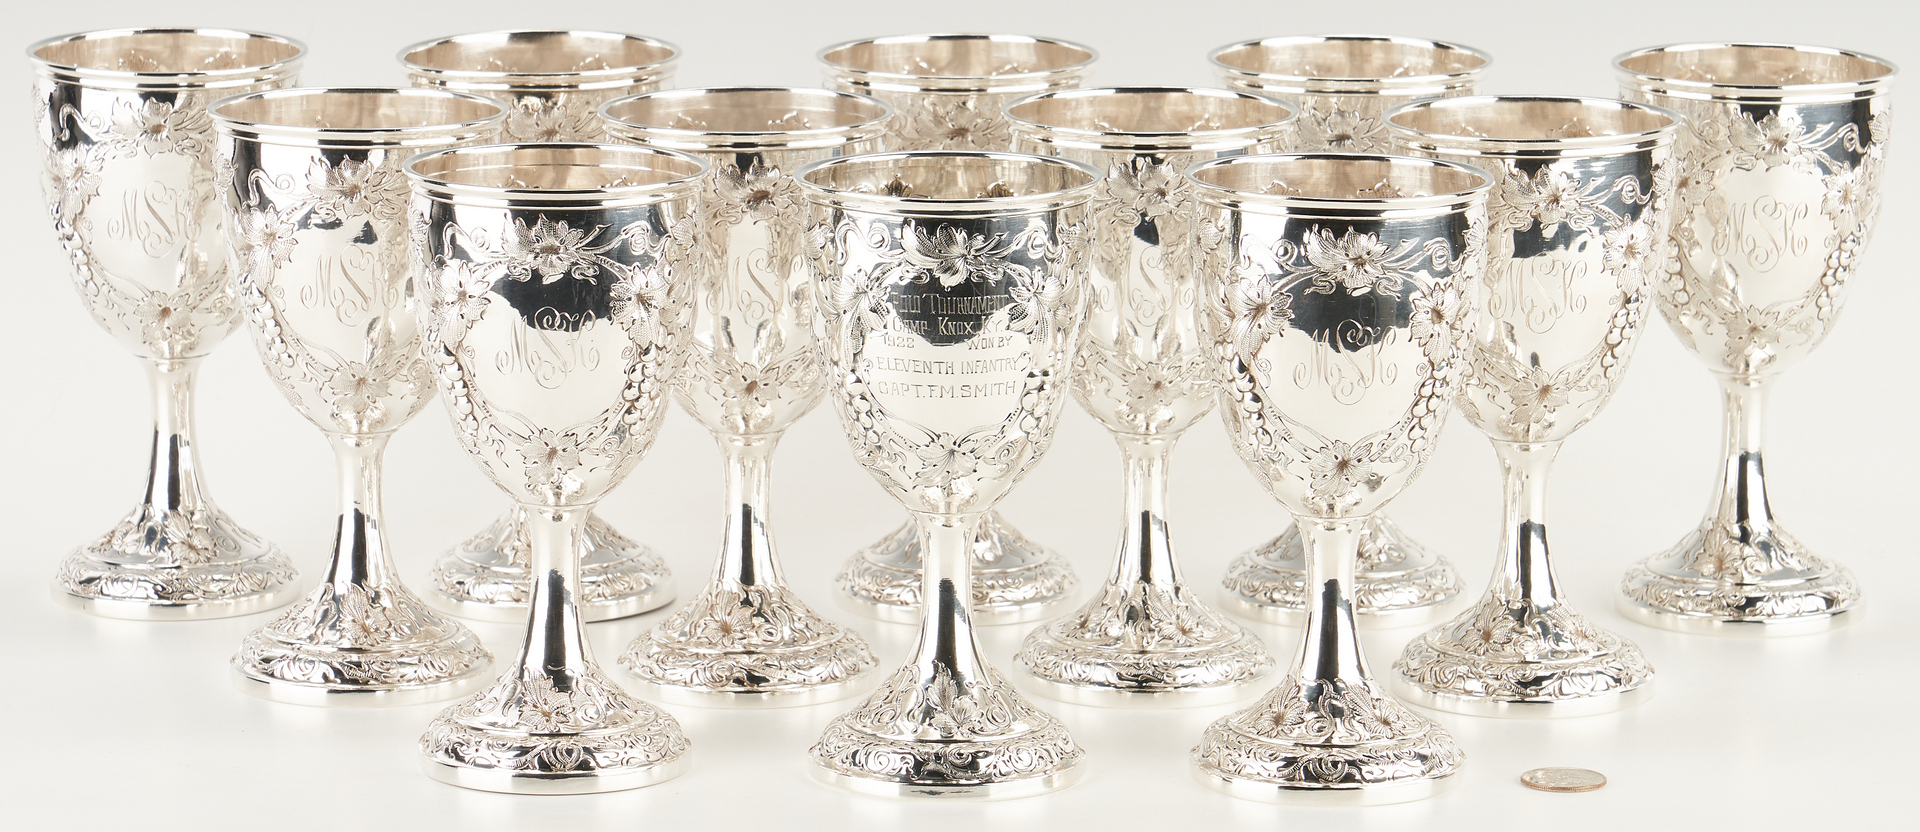 Lot 5: Set of 12 Chinese Export Sterling Silver Goblets, 11 marked Yu Chang